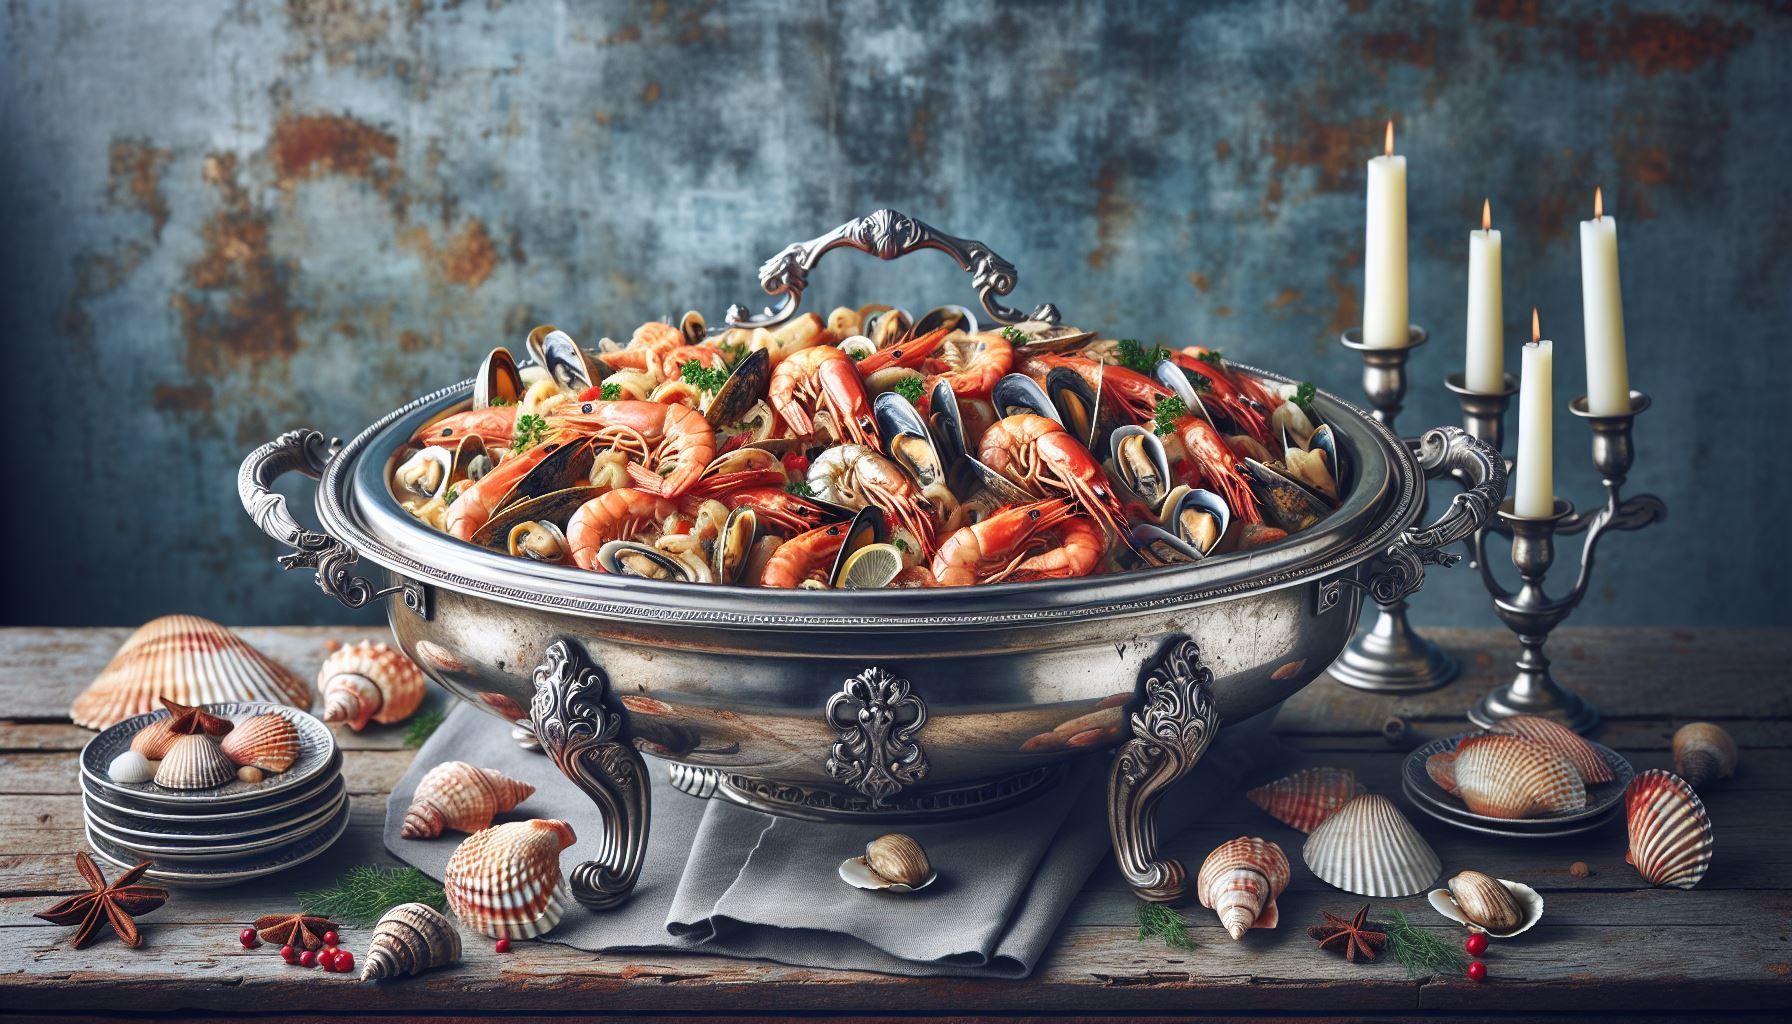 A silver bowl filled with seafood is sitting on a wooden table.